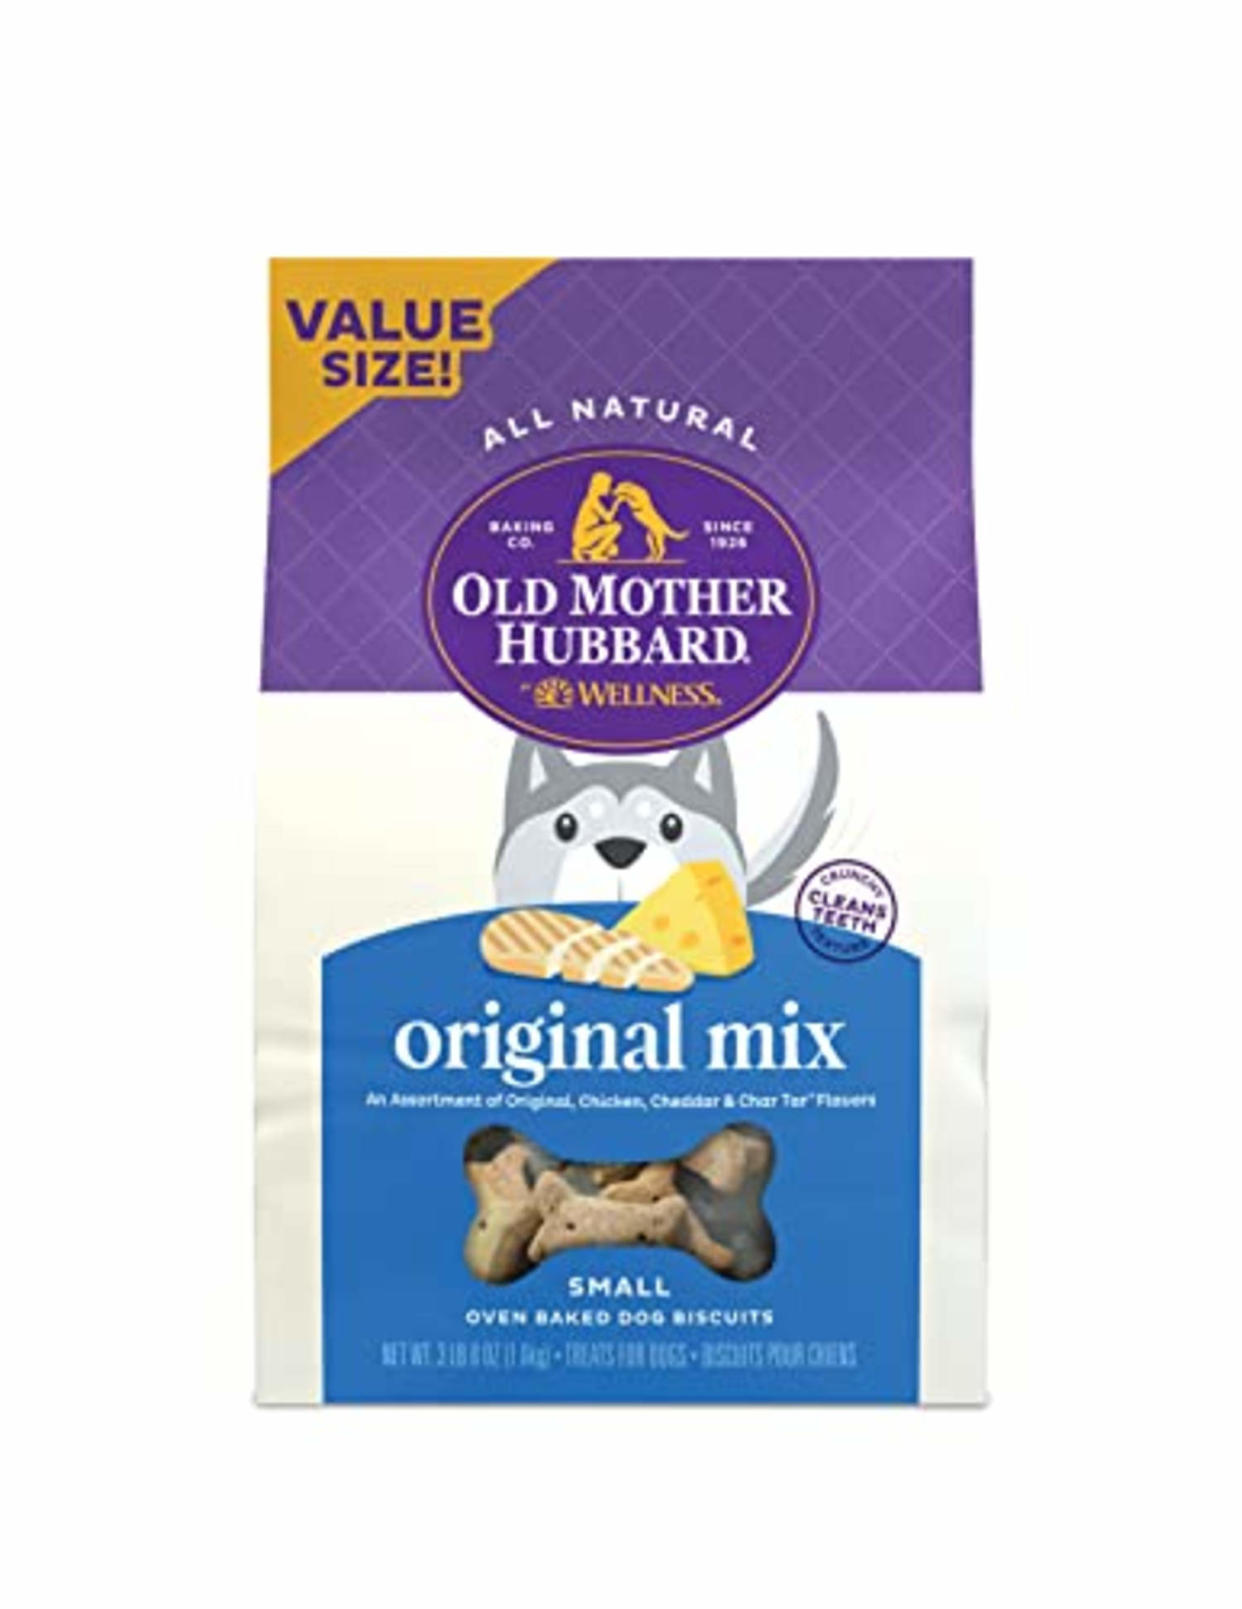 Old Mother Hubbard Original Mix Oven-Baked Dog Treats (Chewy / Chewy)